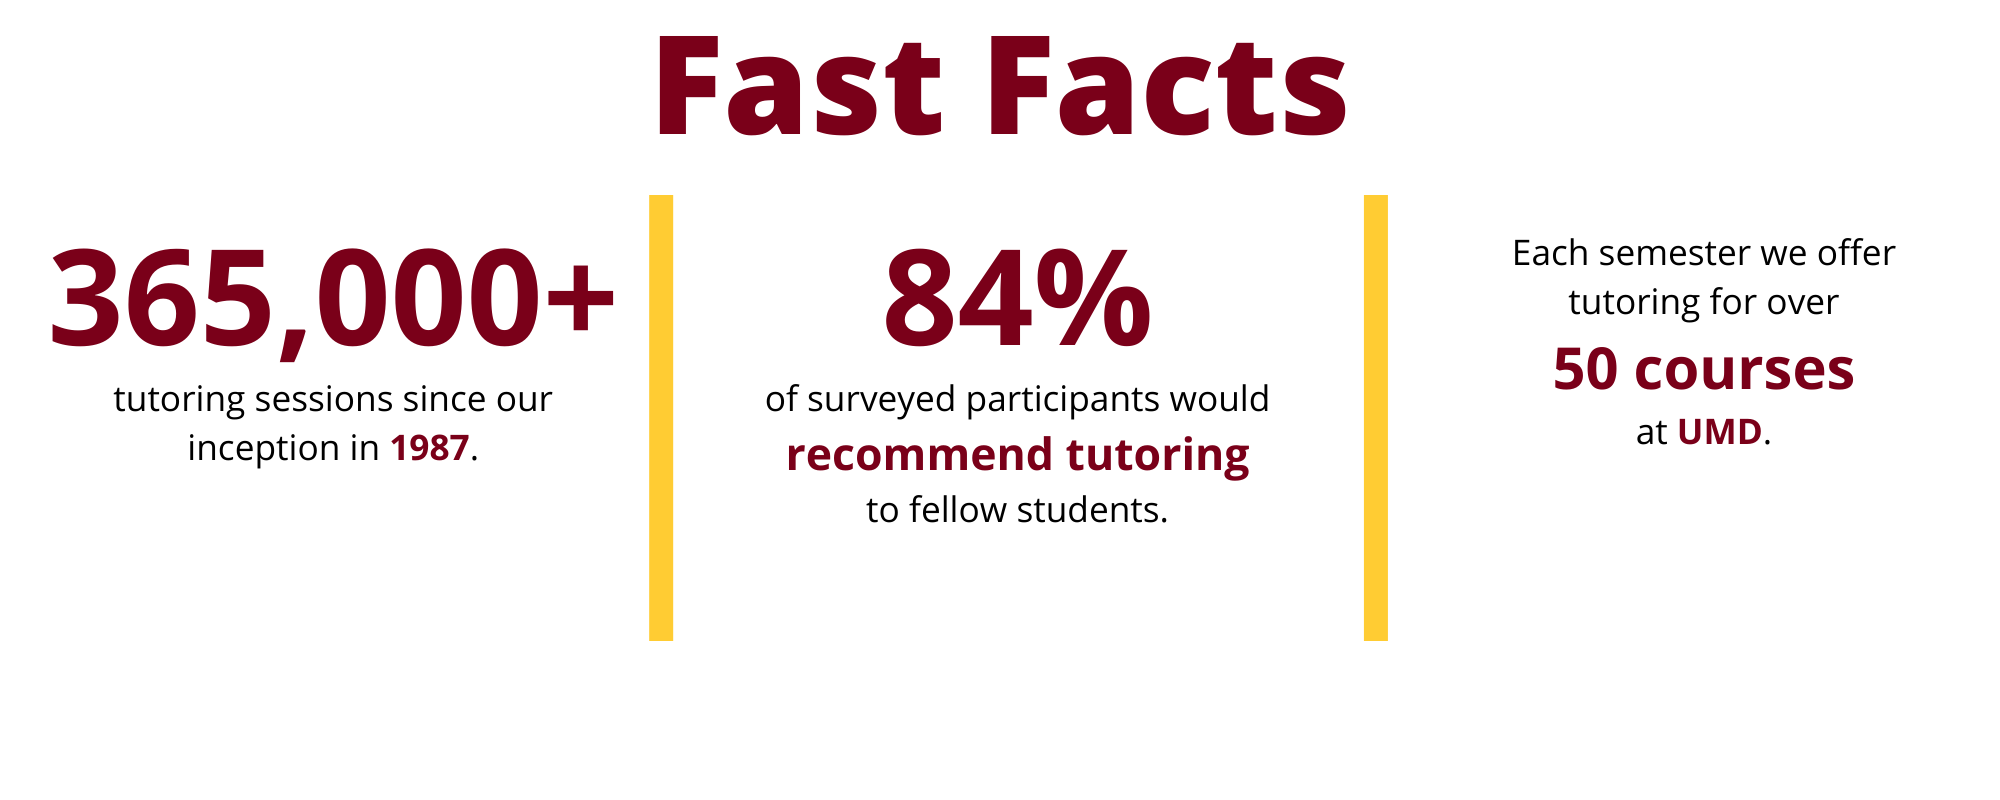 Fast Facts about the Tutoring Center